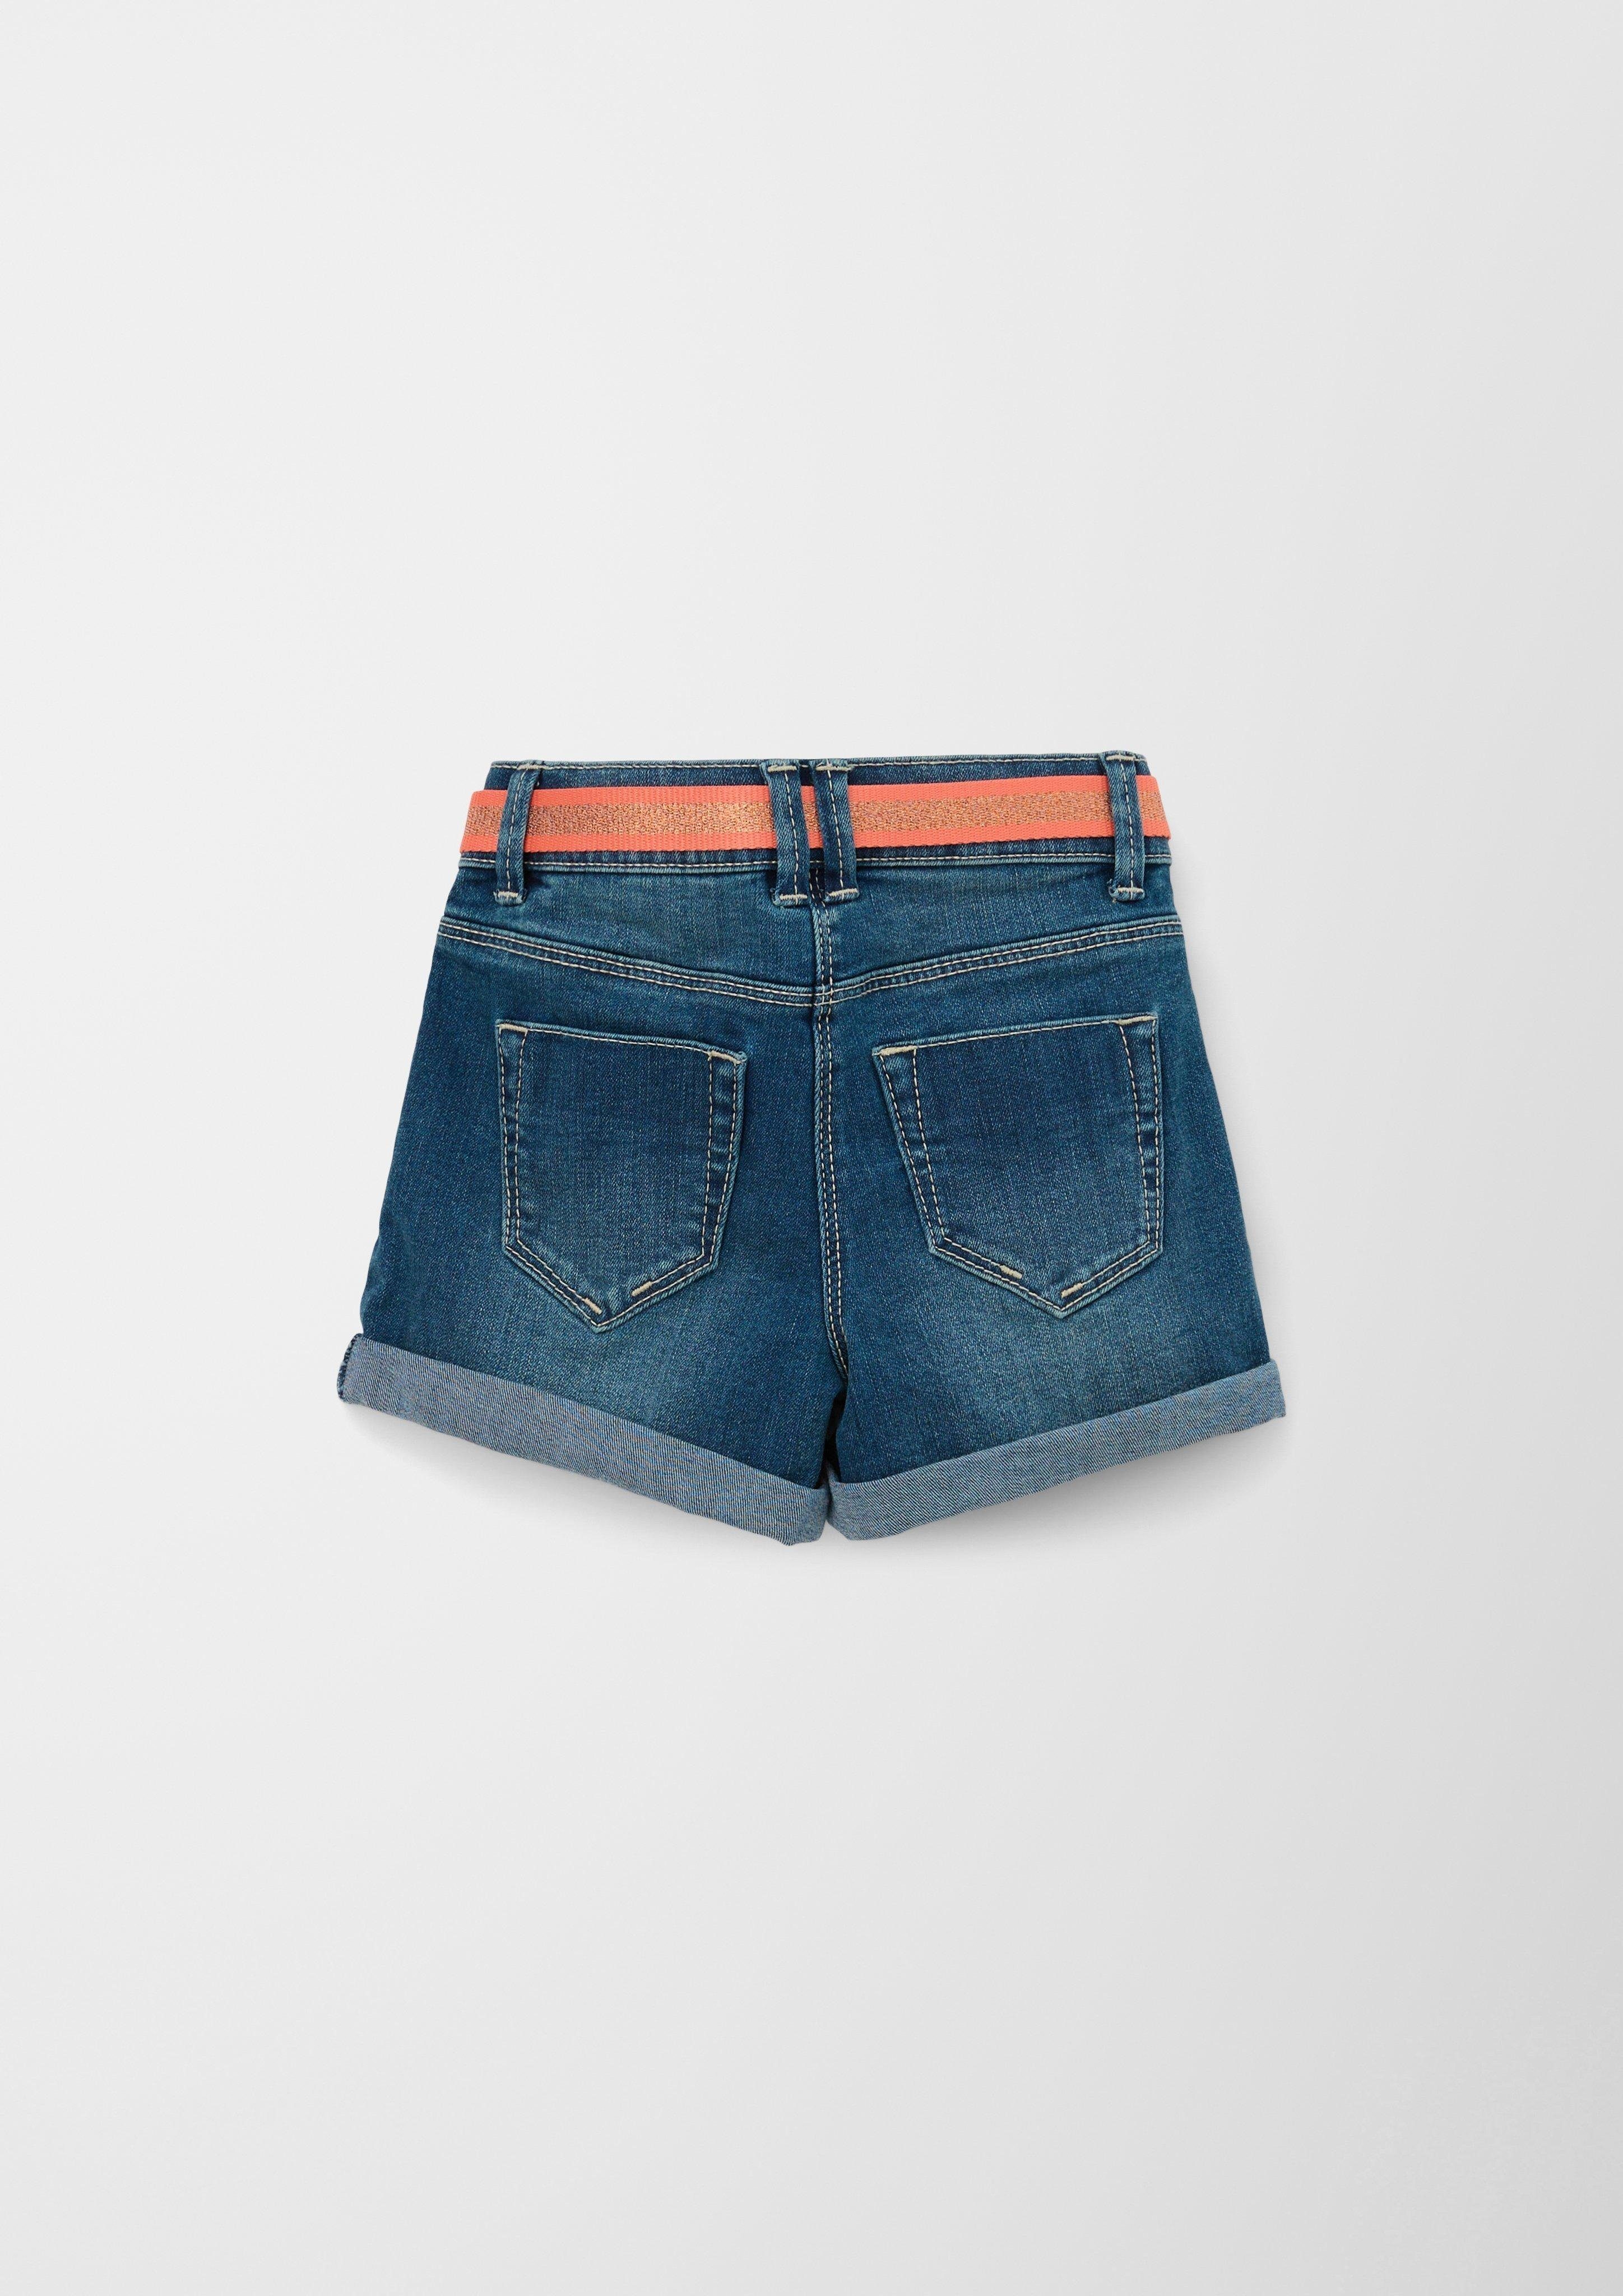 Wide / High Rise Jeansshorts Fit Waschung s.Oliver Leg / / Loose Jeans-Shorts